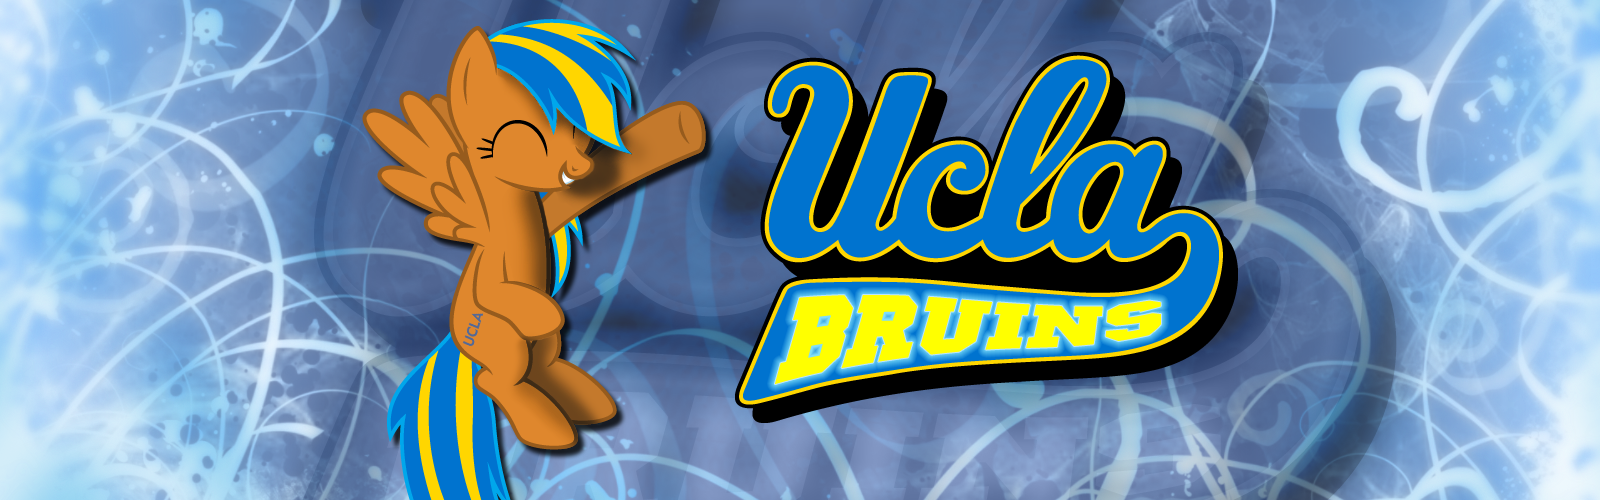 Ucla Wallpaper Bronies At By